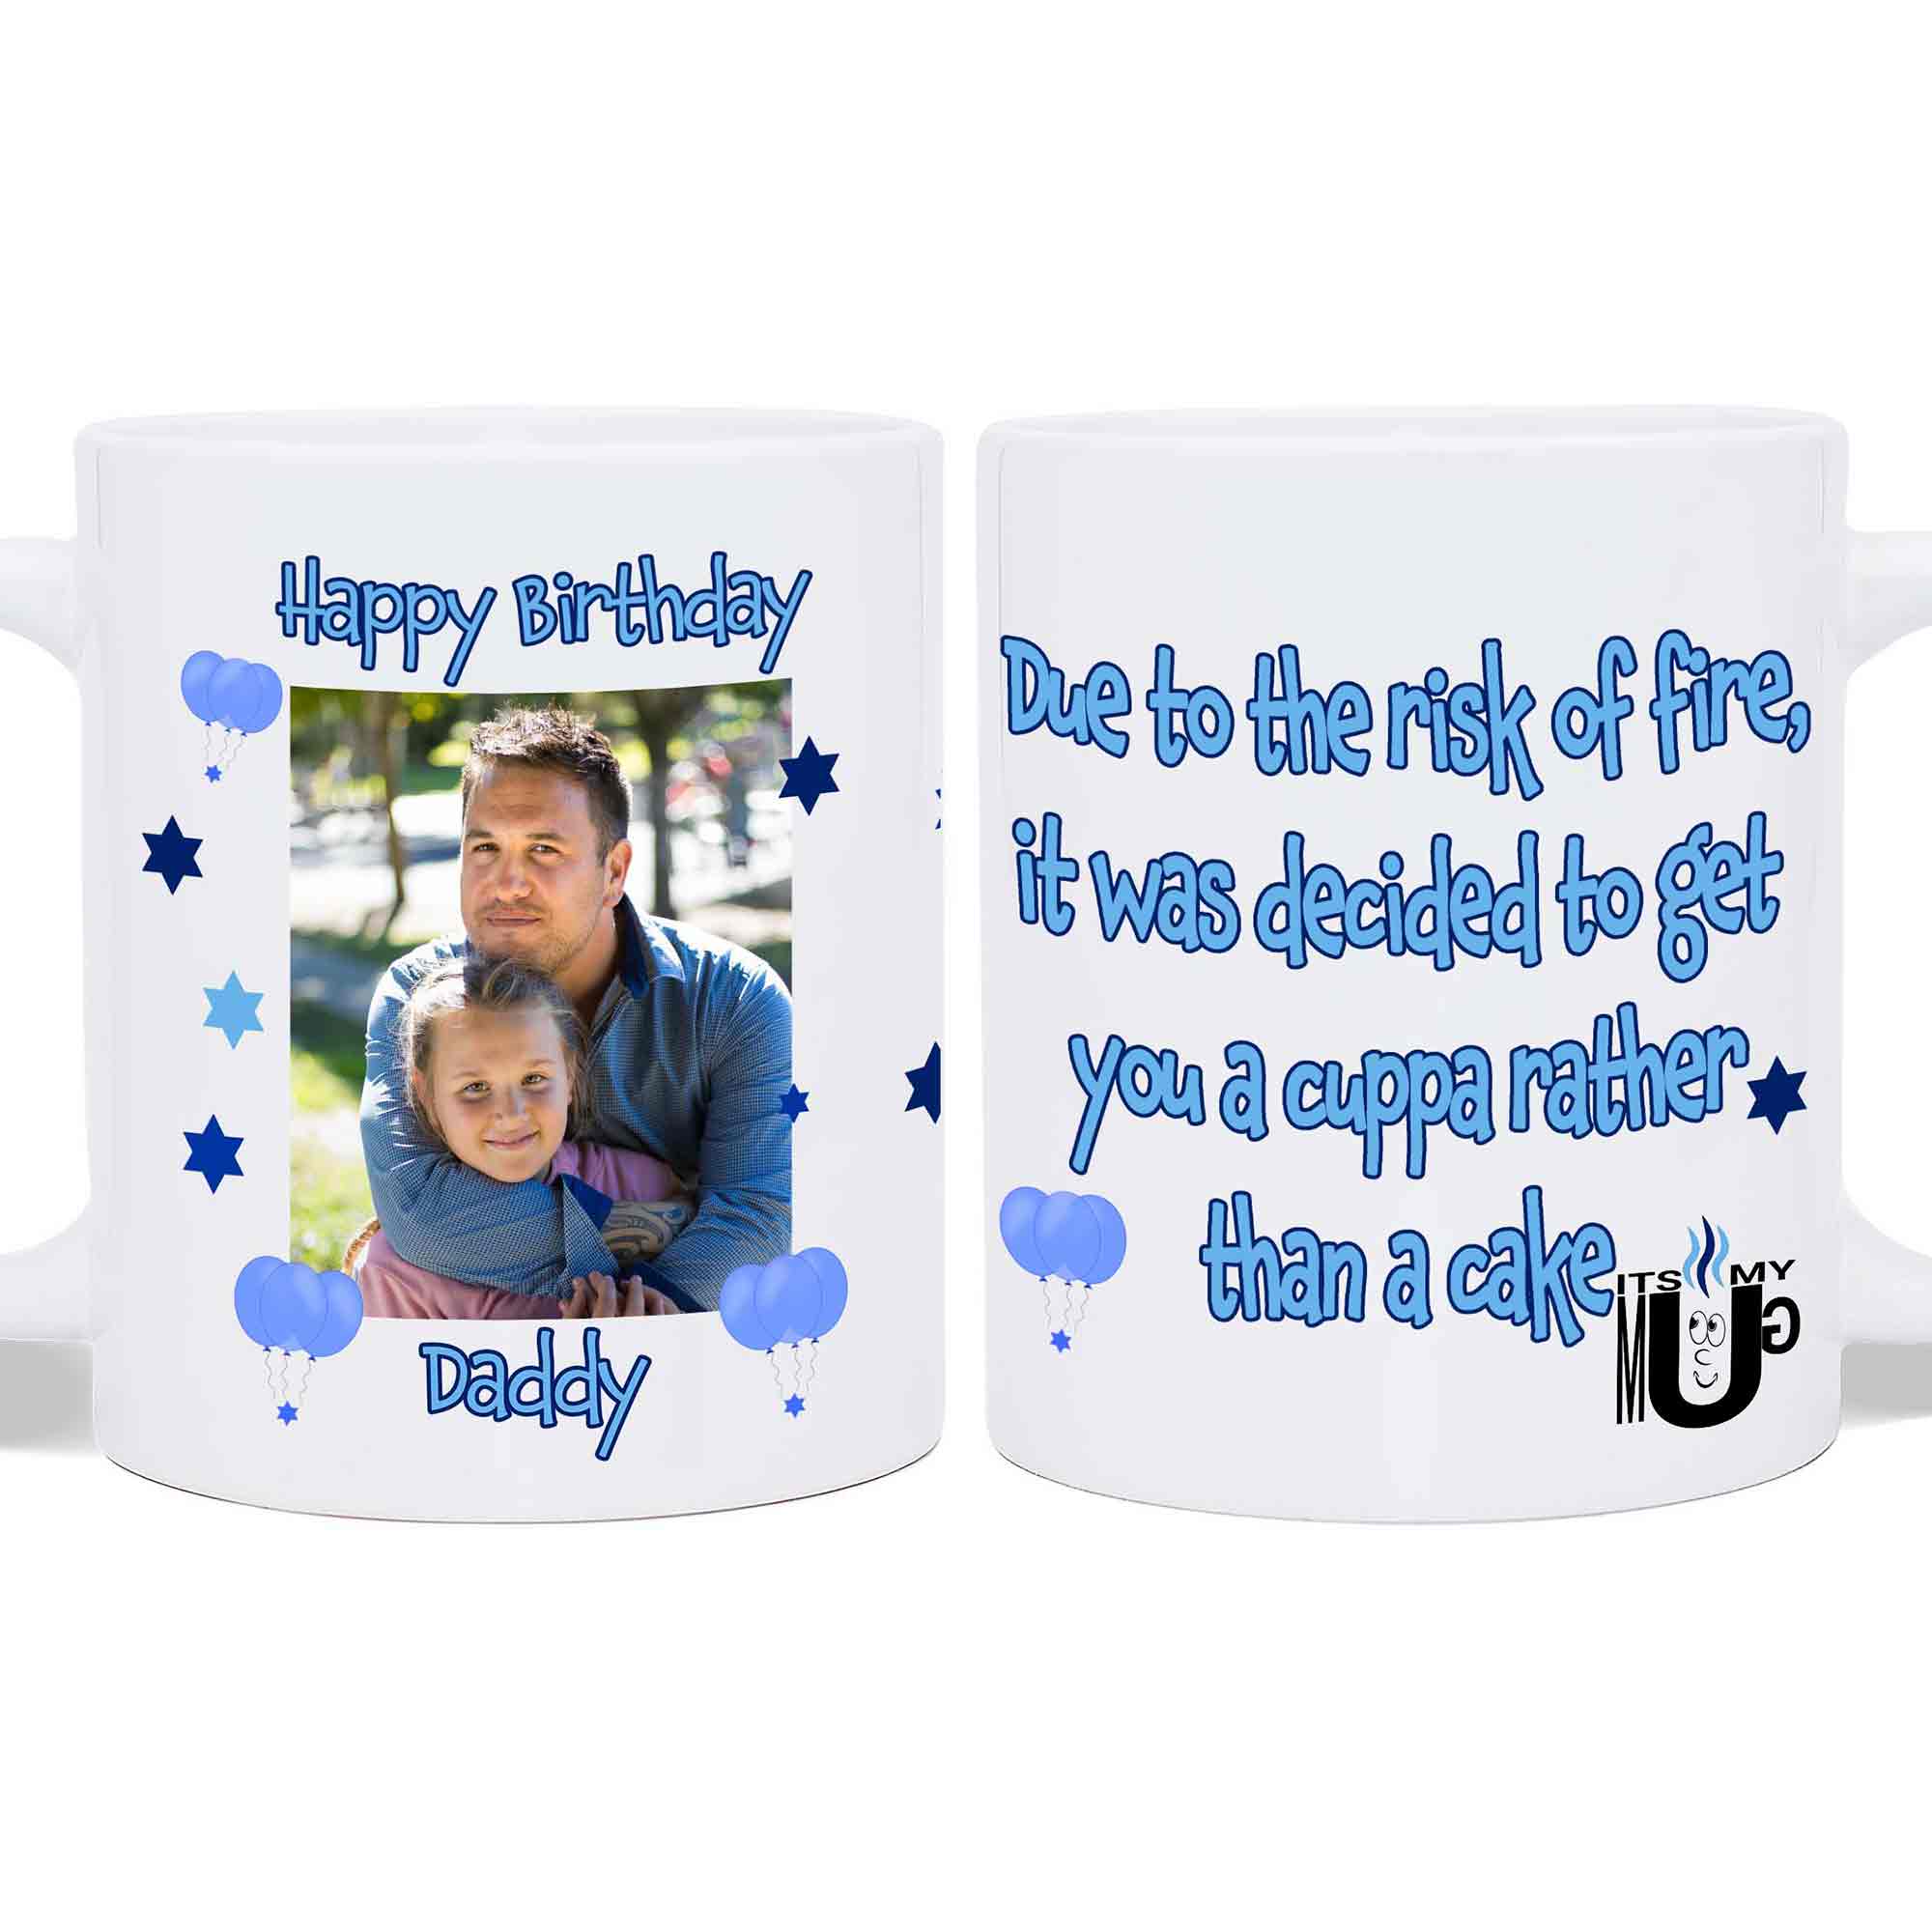 Personalized Father's Day Mug Funny Gifts For Dad Mug Dad Birthday Gifts  Daddy | eBay